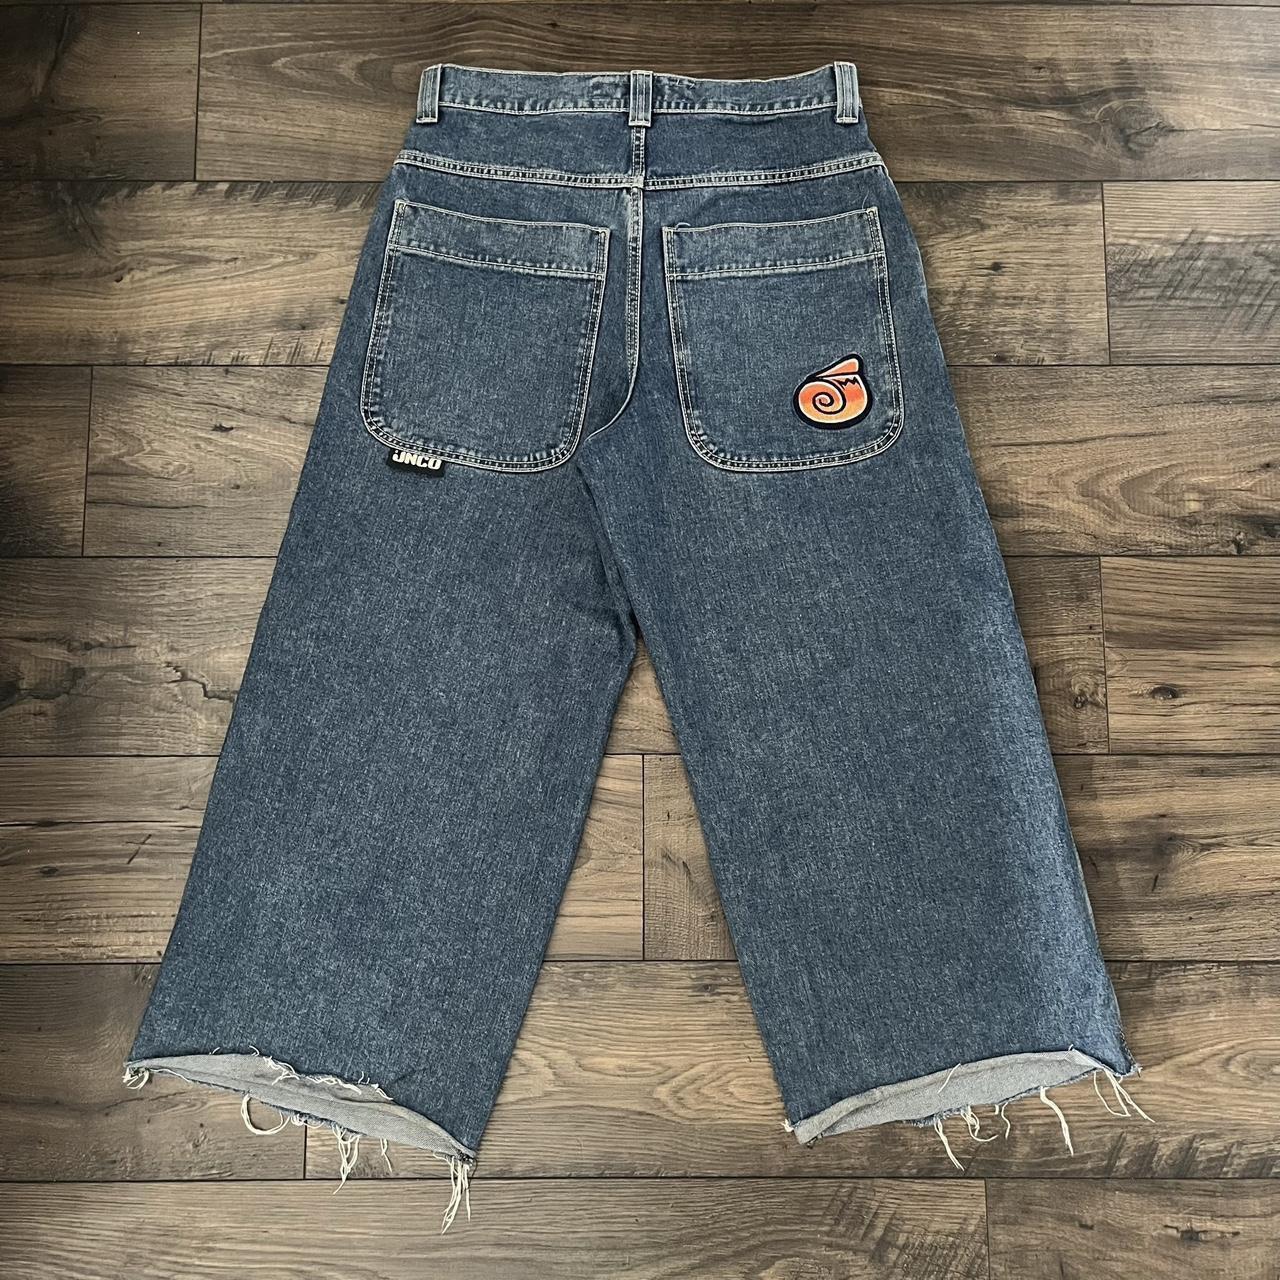 TWIN CANNON JNCOS HIGHEST OFFER 150 Size:... - Depop